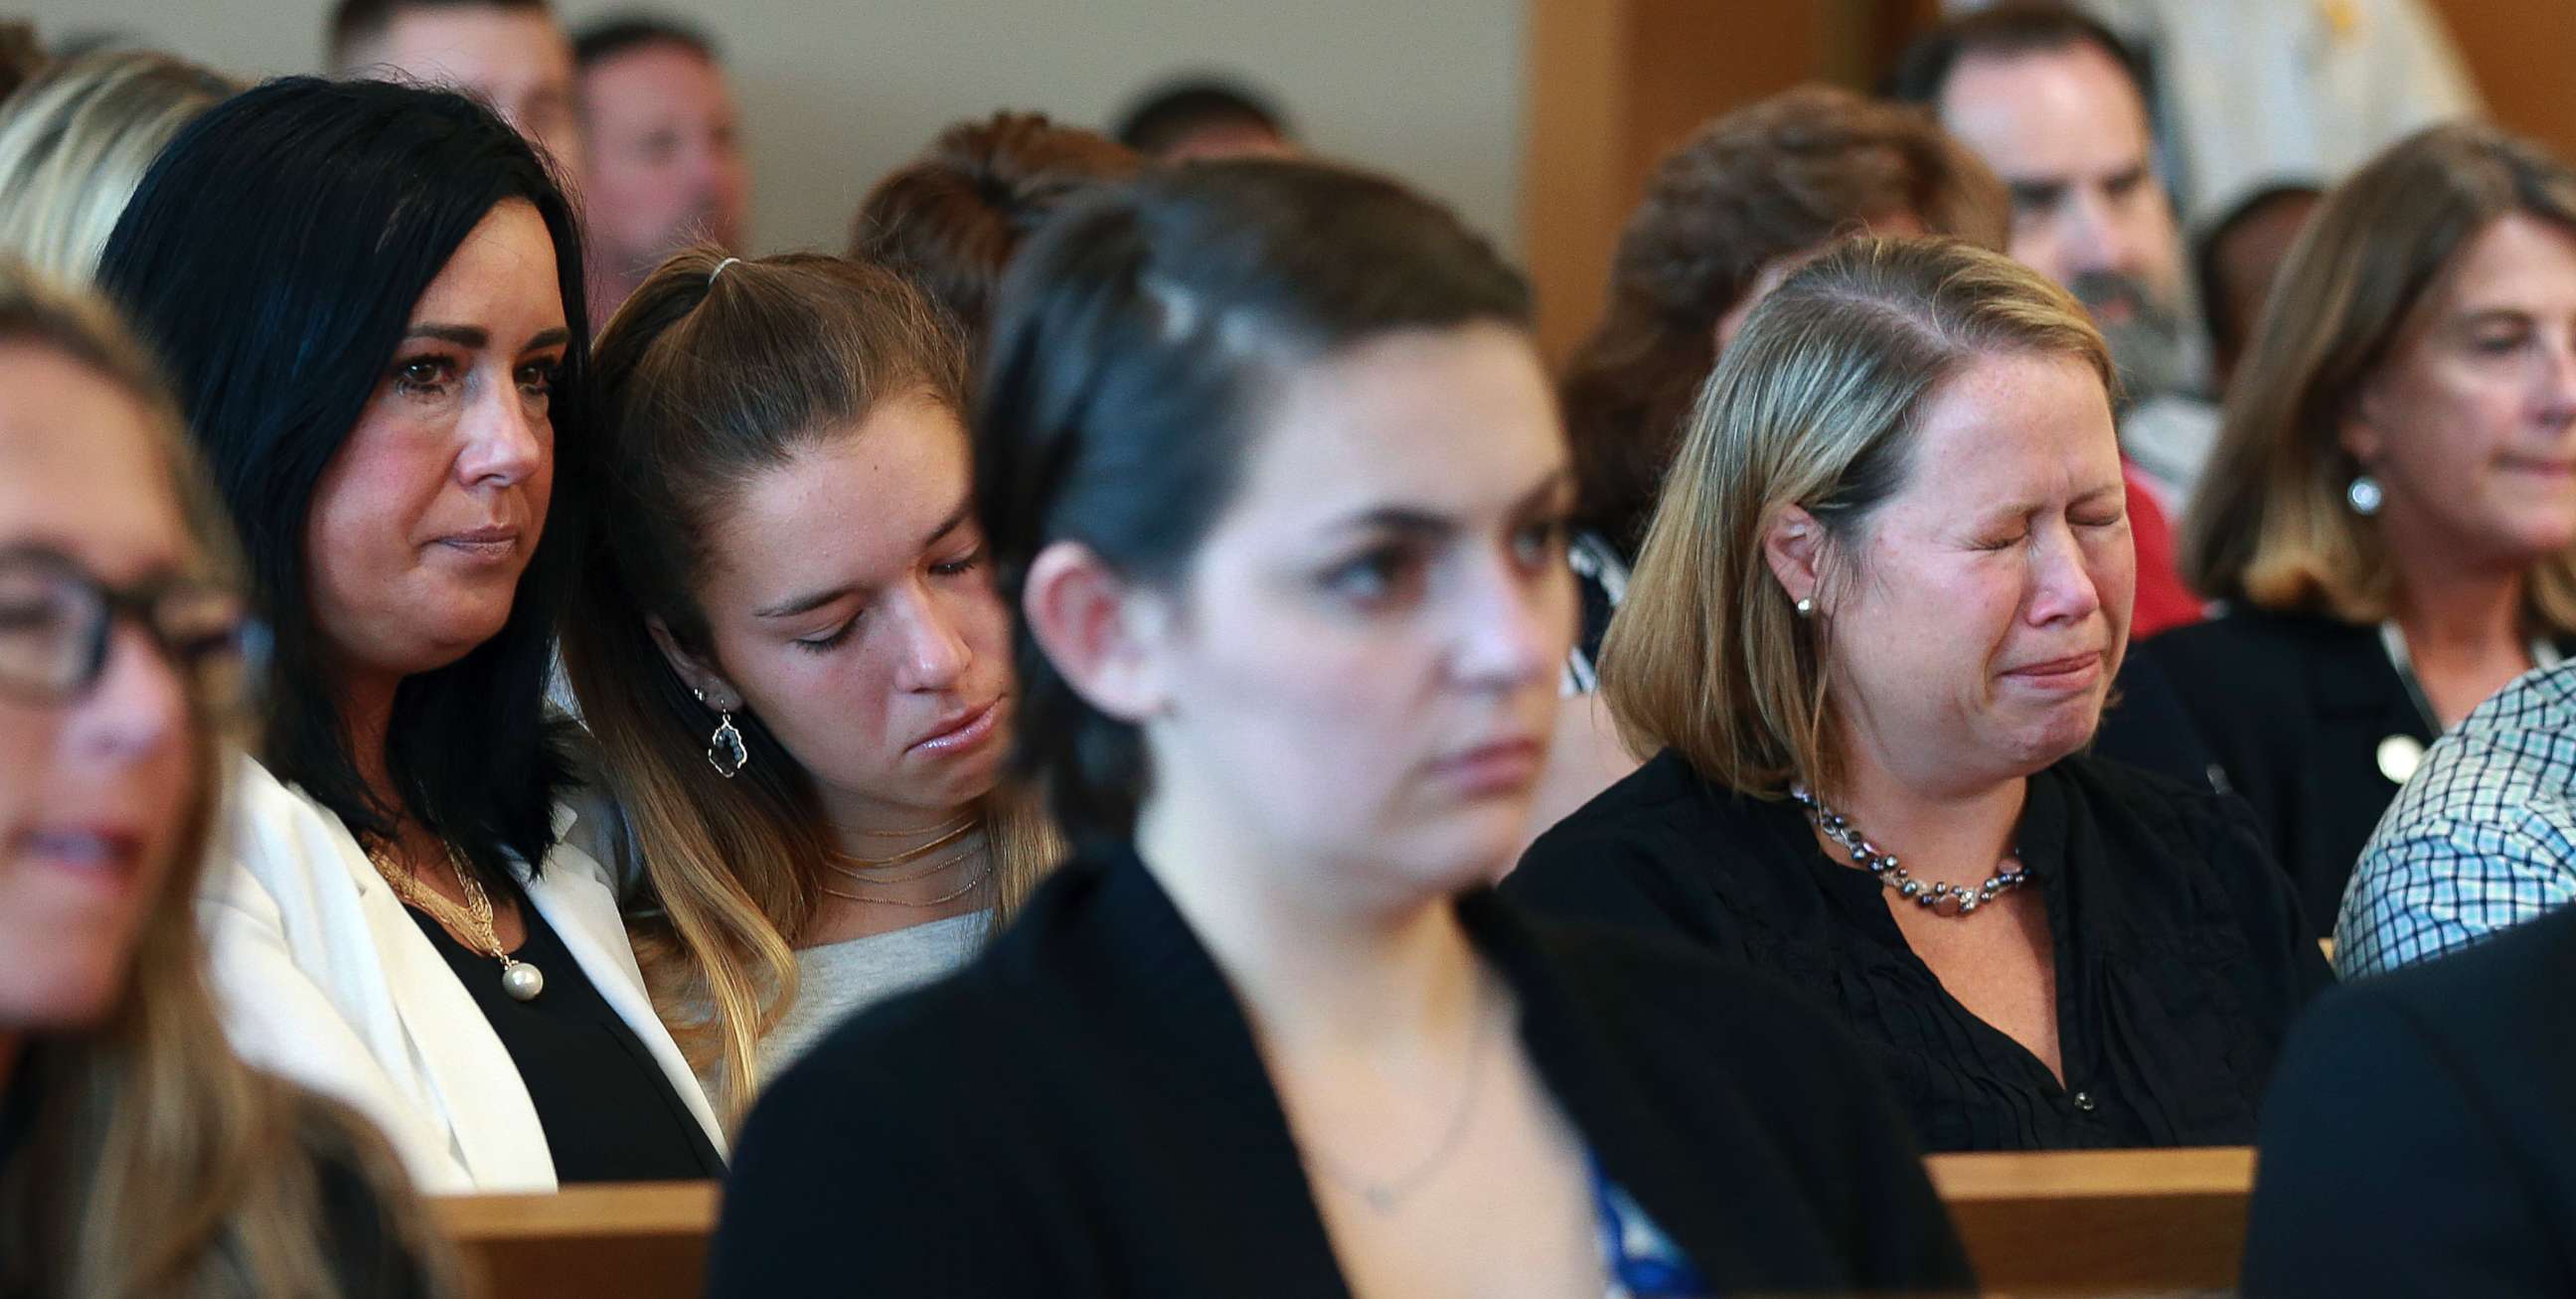 PHOTO: Conrad Roy III's mother Lynn, left, listens as her husband Conrad Roy Jr. reads his victim impact statement in court in Taunton, Mass., before Michelle Carter's sentencing, August 3, 2017.